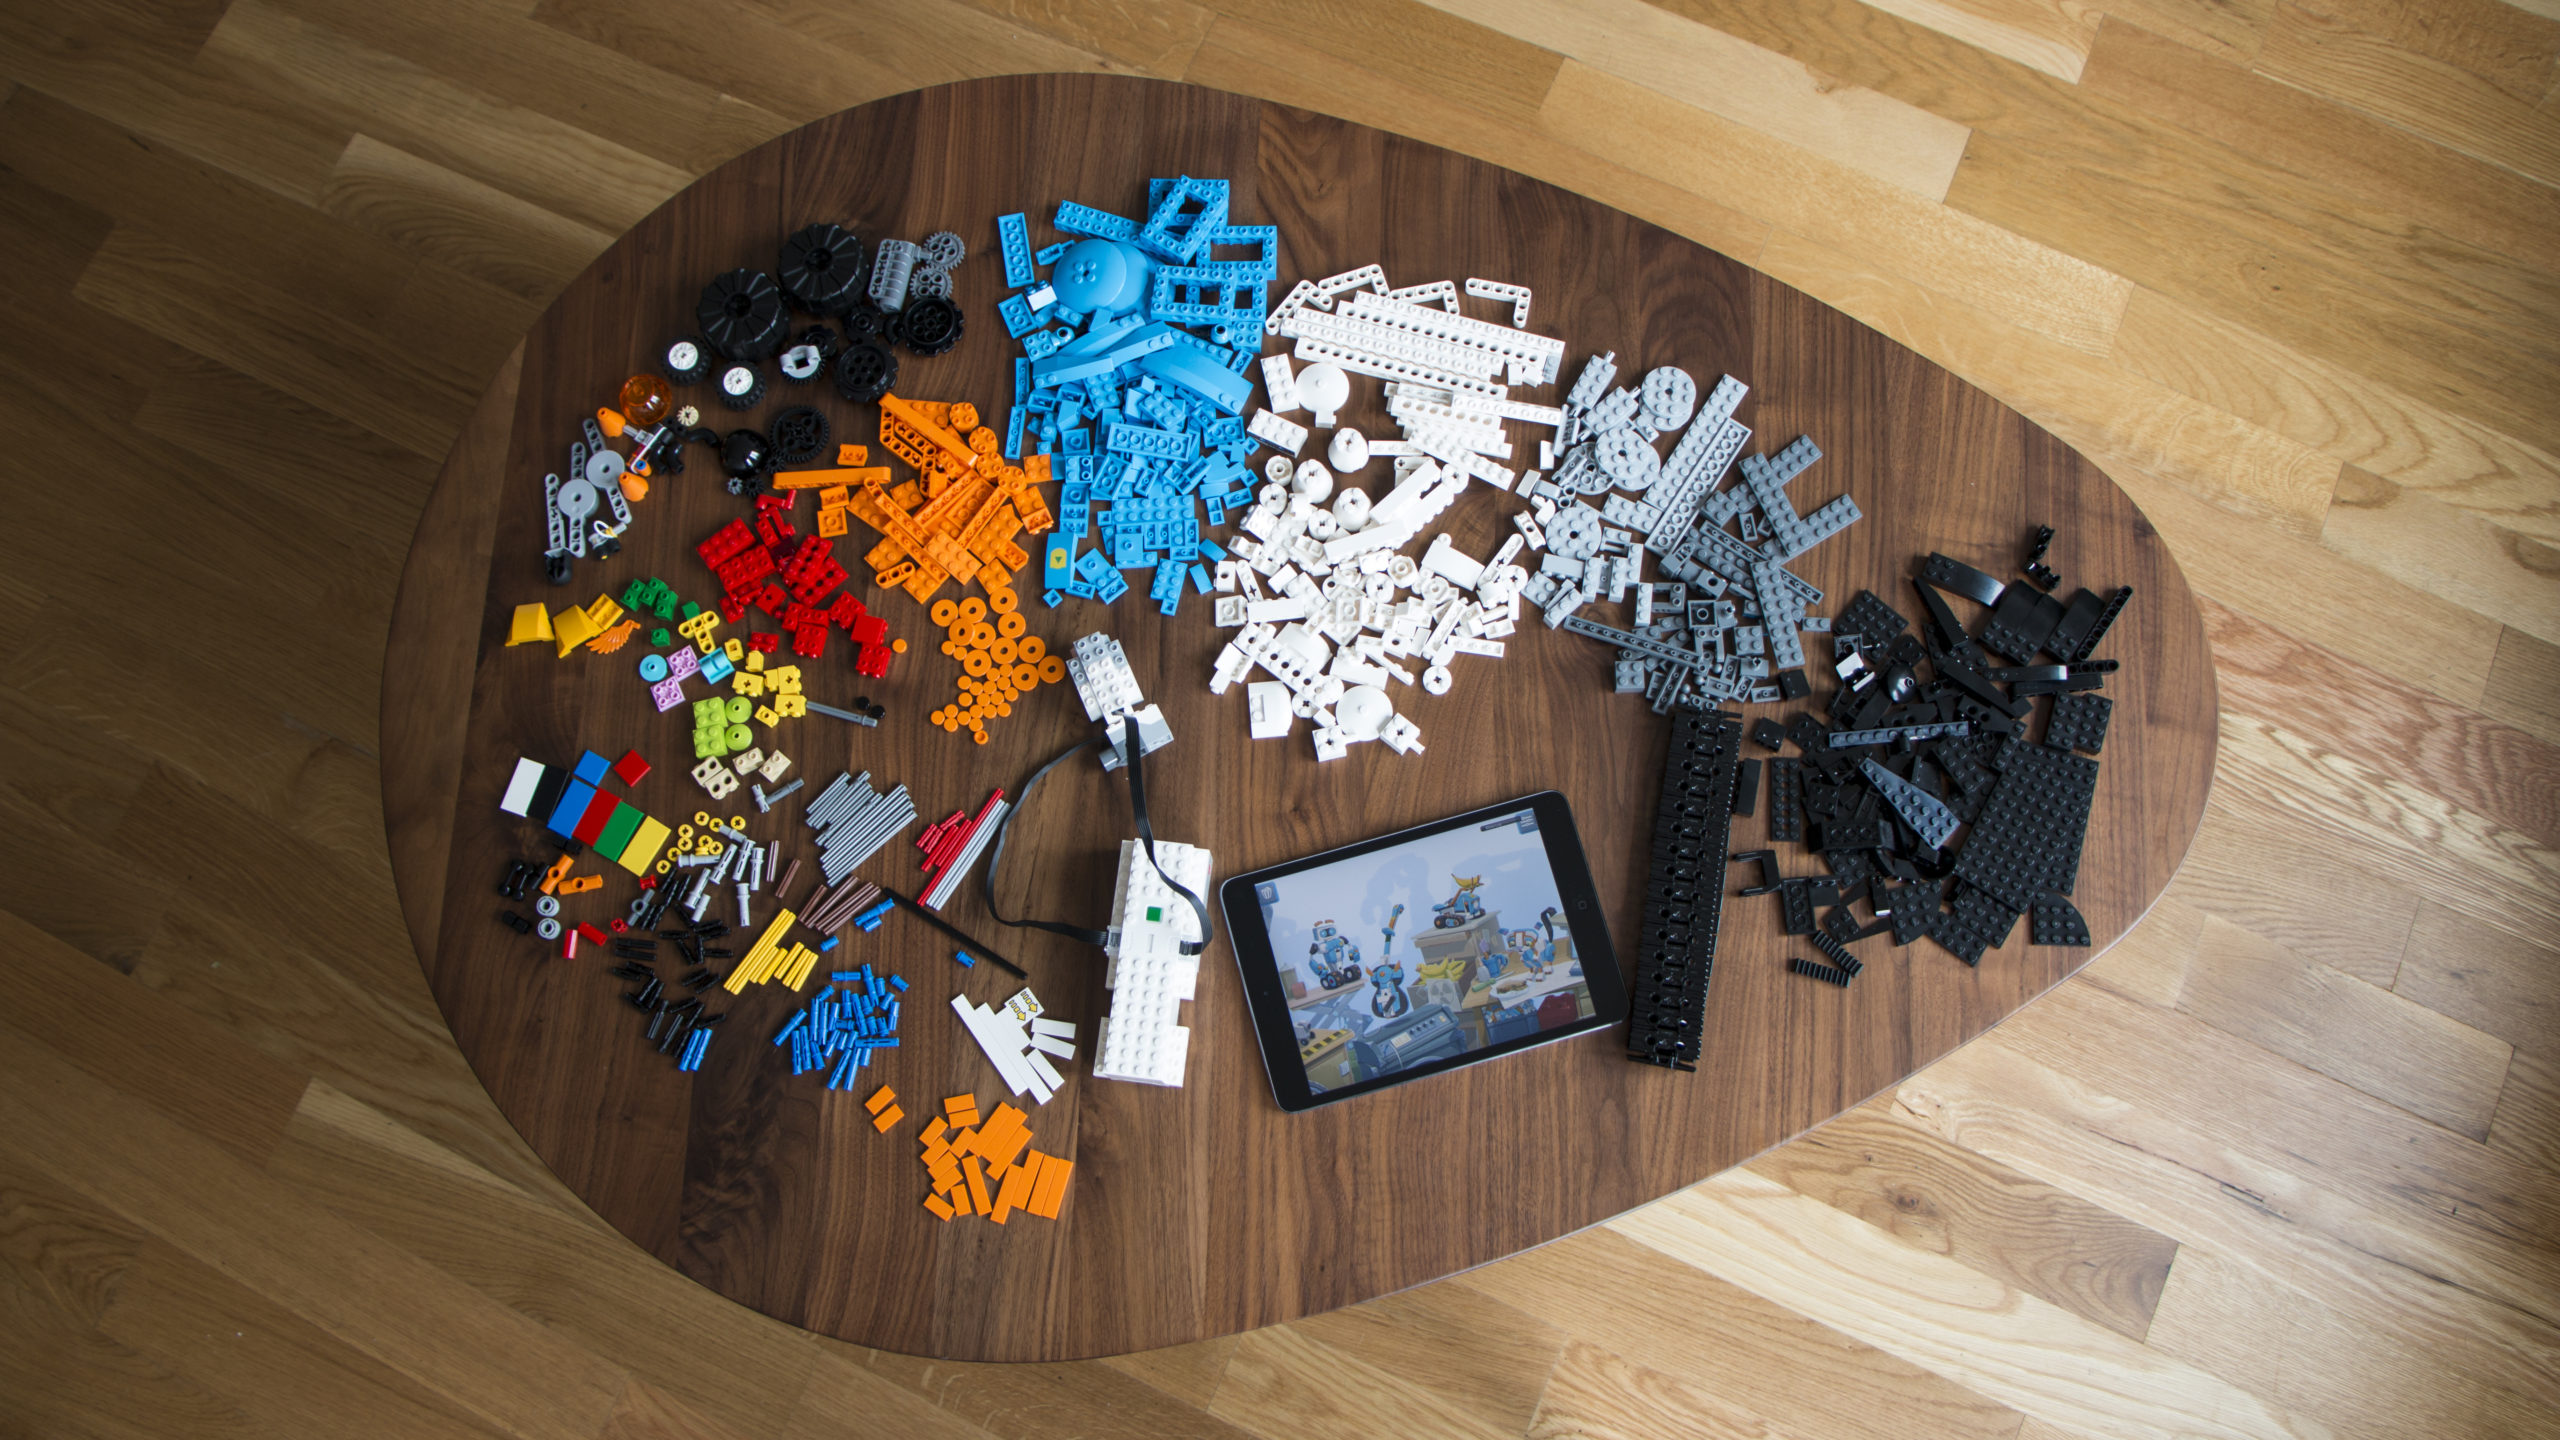 Lego’s New Boost Creative Toolbox Made Me Fall In Love With Lego All Over Again